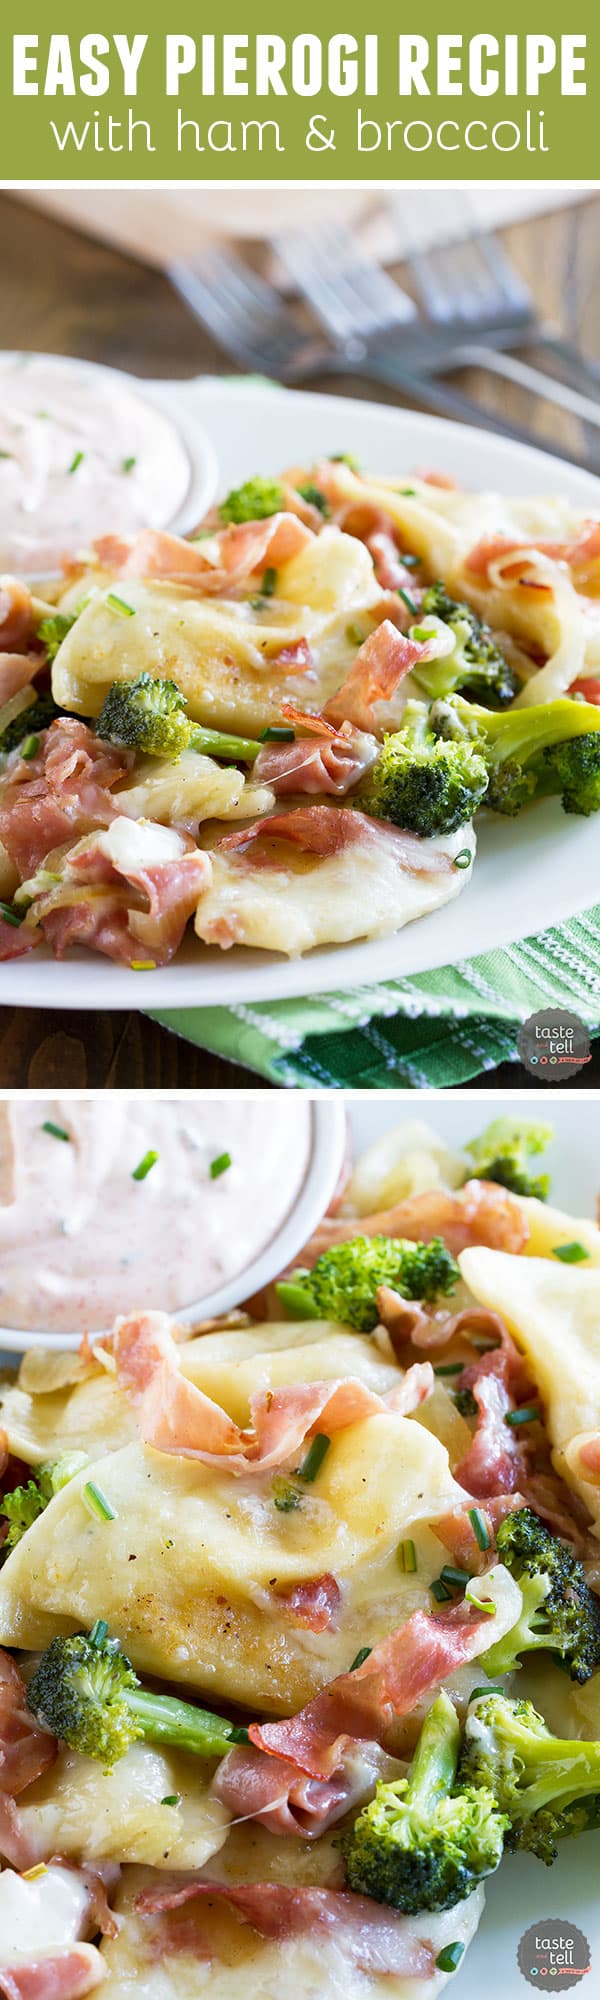 Starting with frozen pierogi makes this Easy Pierogi Recipe with Ham and Broccoli an easy weeknight meal. It's a fun and tasty meal that the whole family will love!